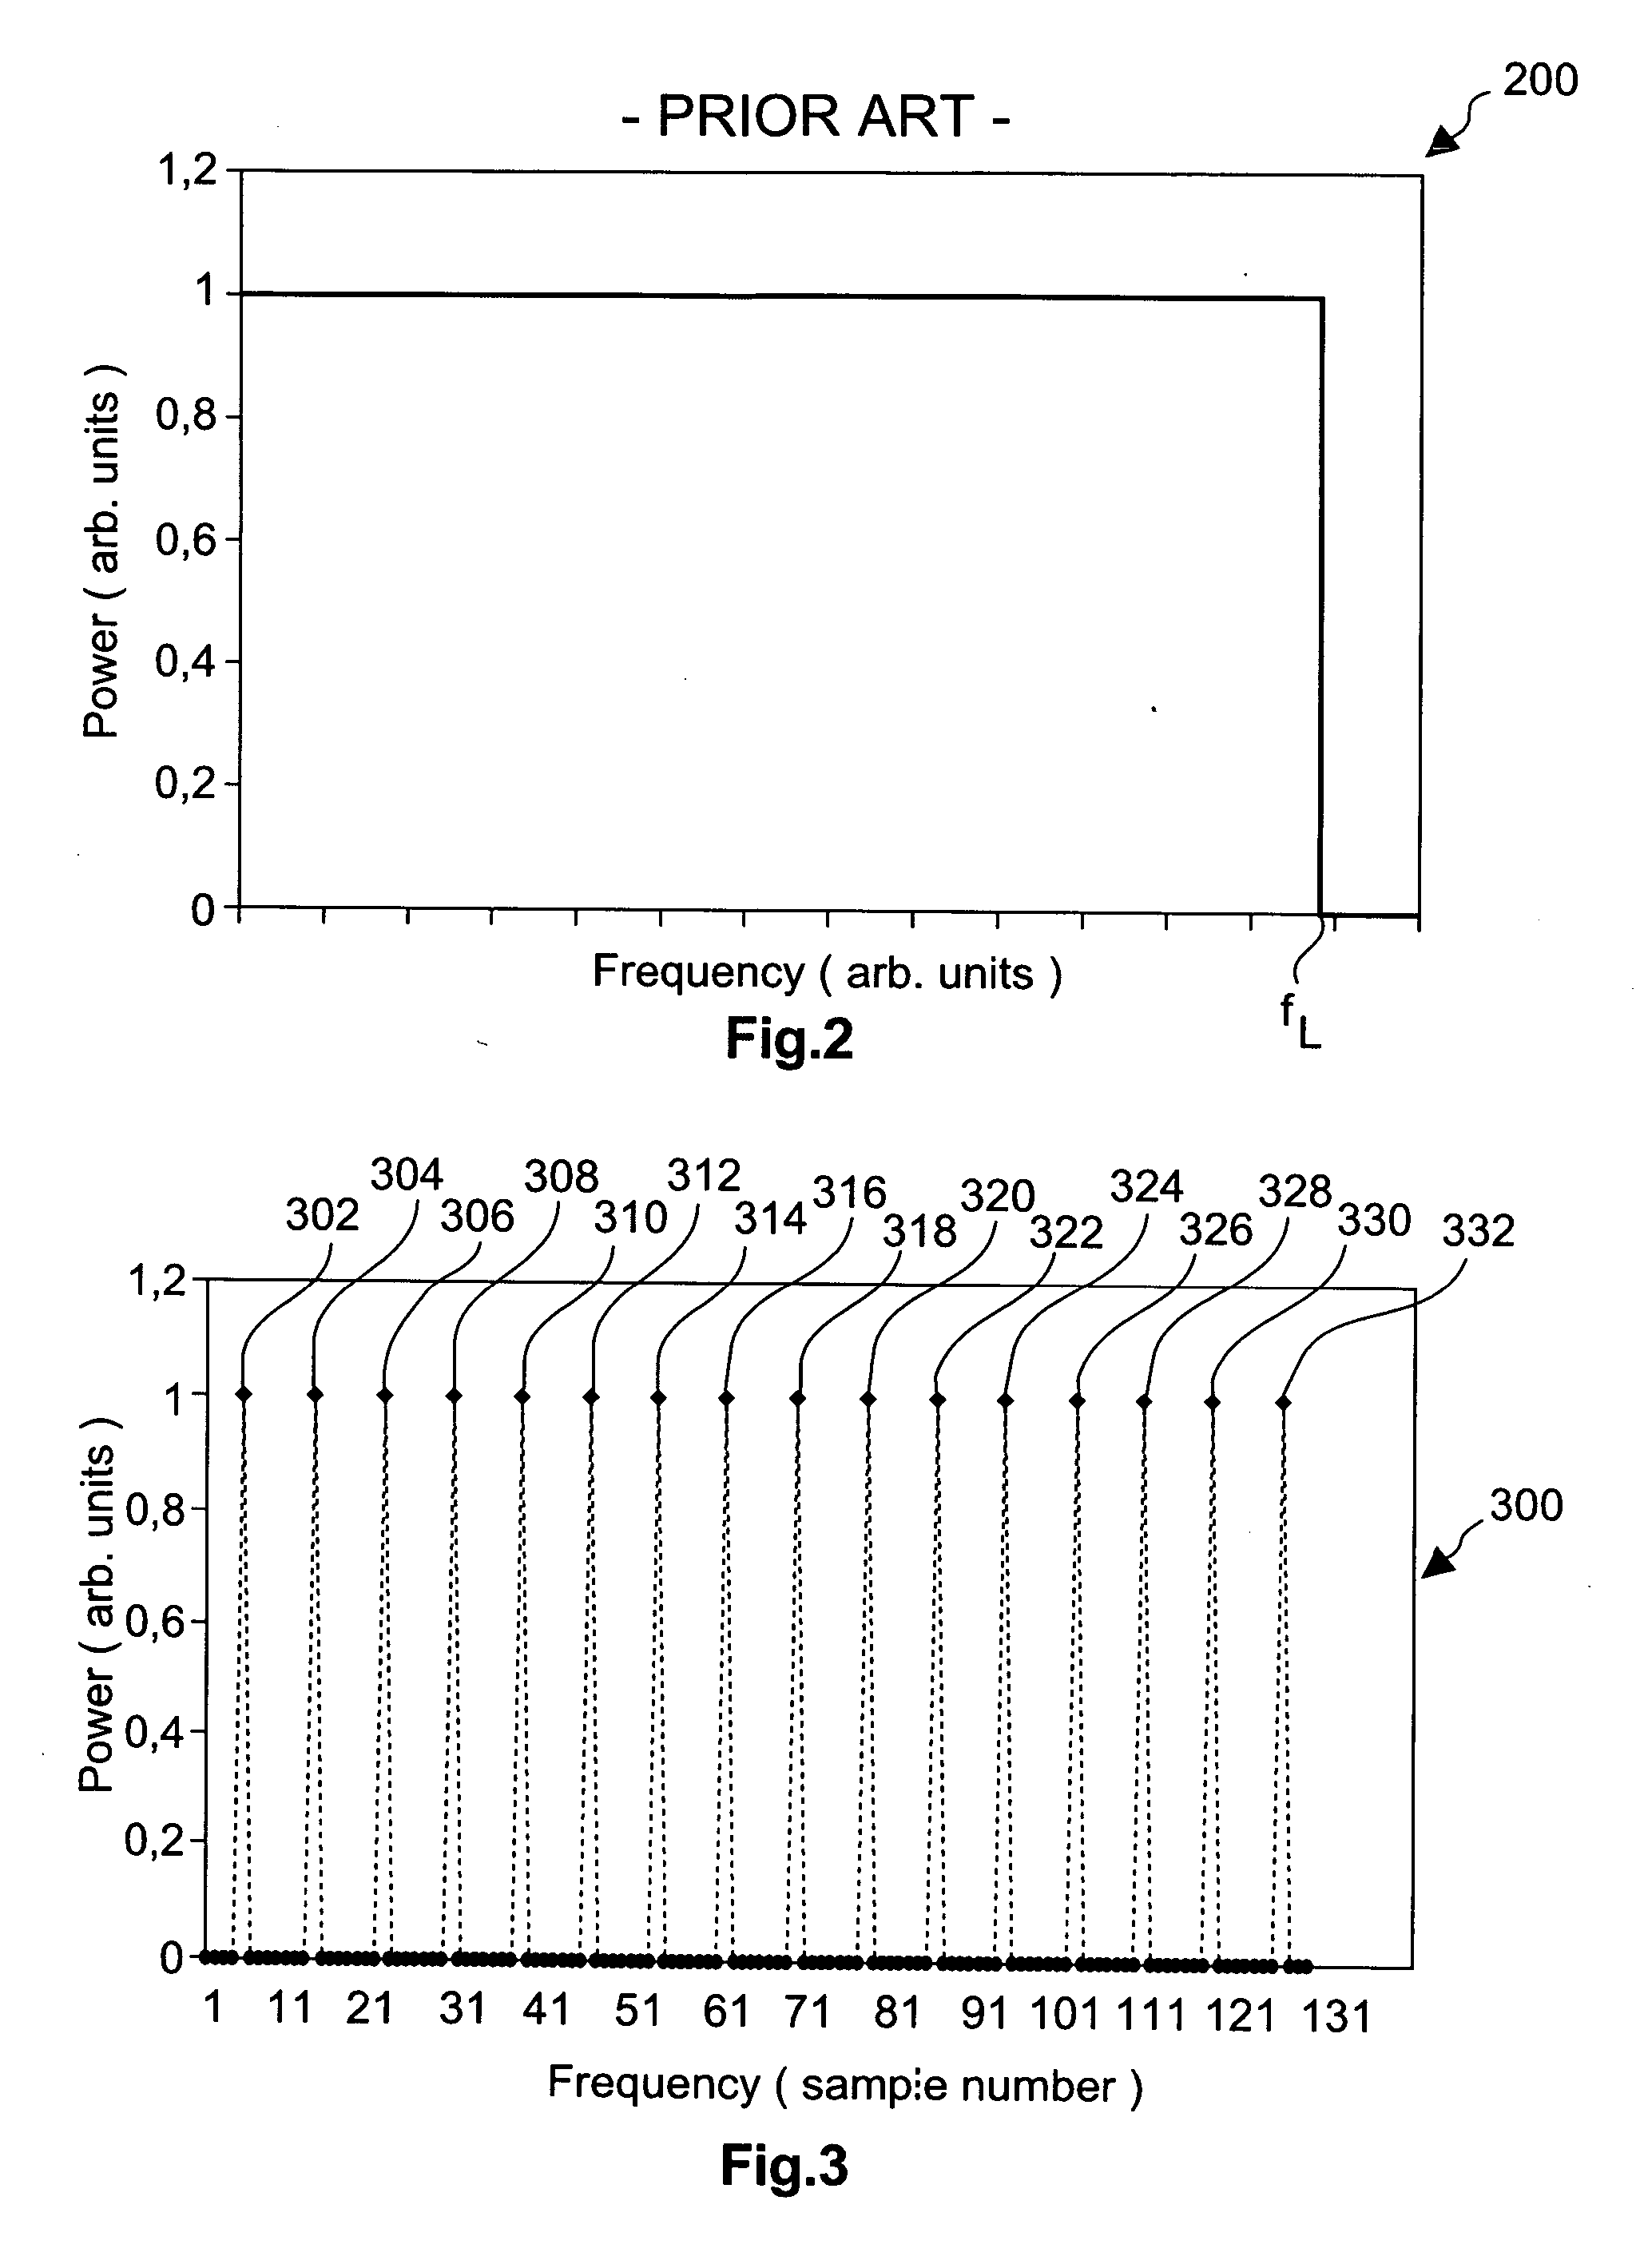 Novel pilot sequences and structures with low peak-to-average power ratio